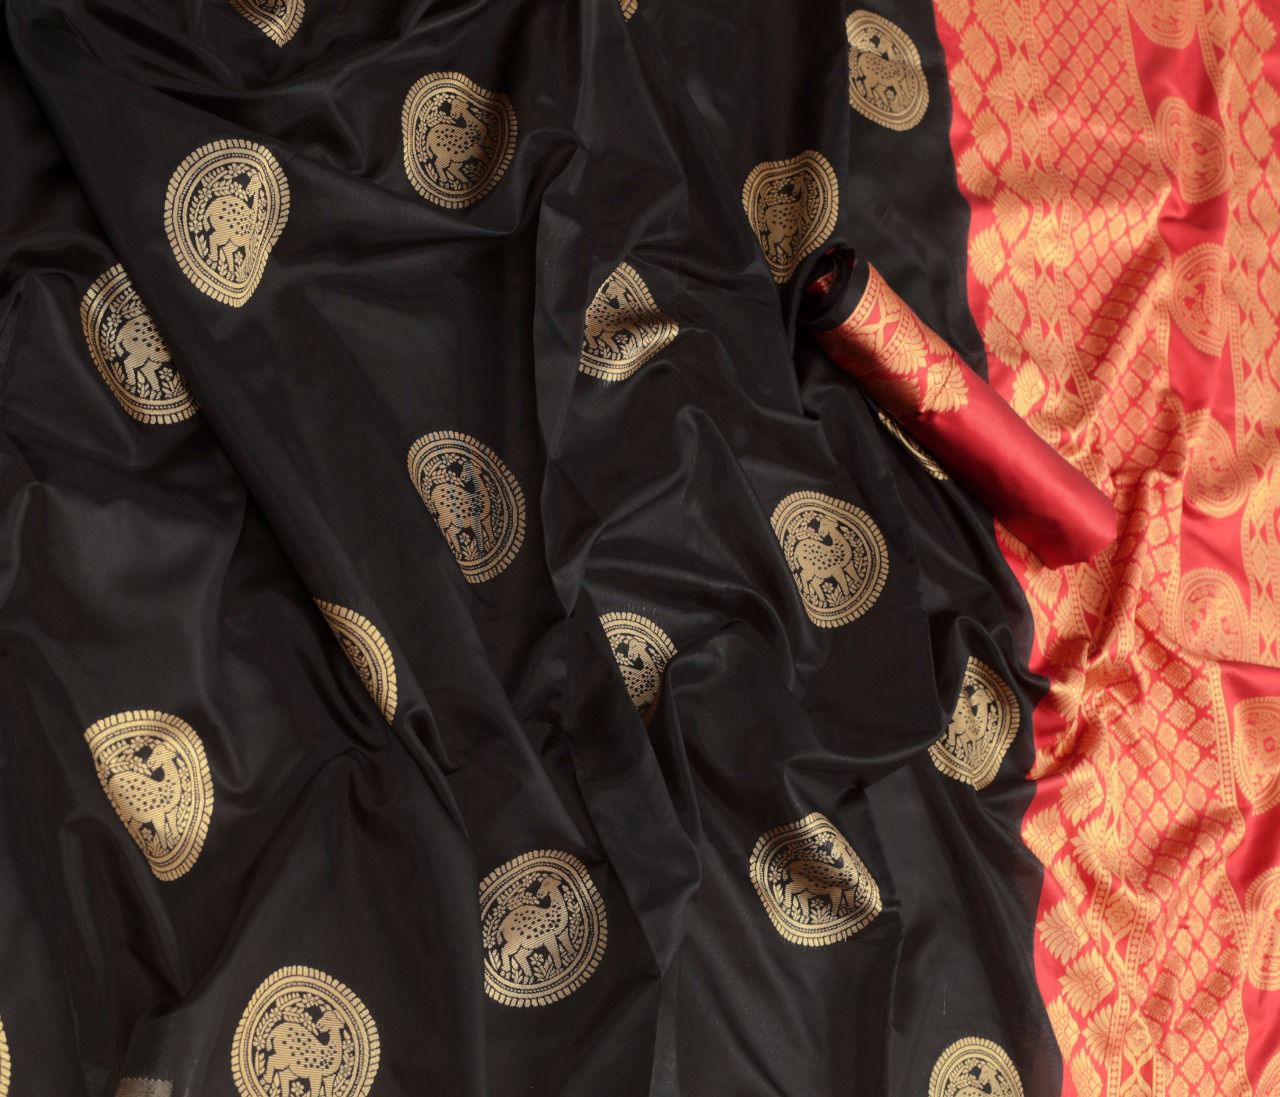 Attractive Black and Red Colour Lichi Silk saree | Saree With Beautiful Rich Pallu And Jaquard Work On all Over The Saree | dhoti style sari